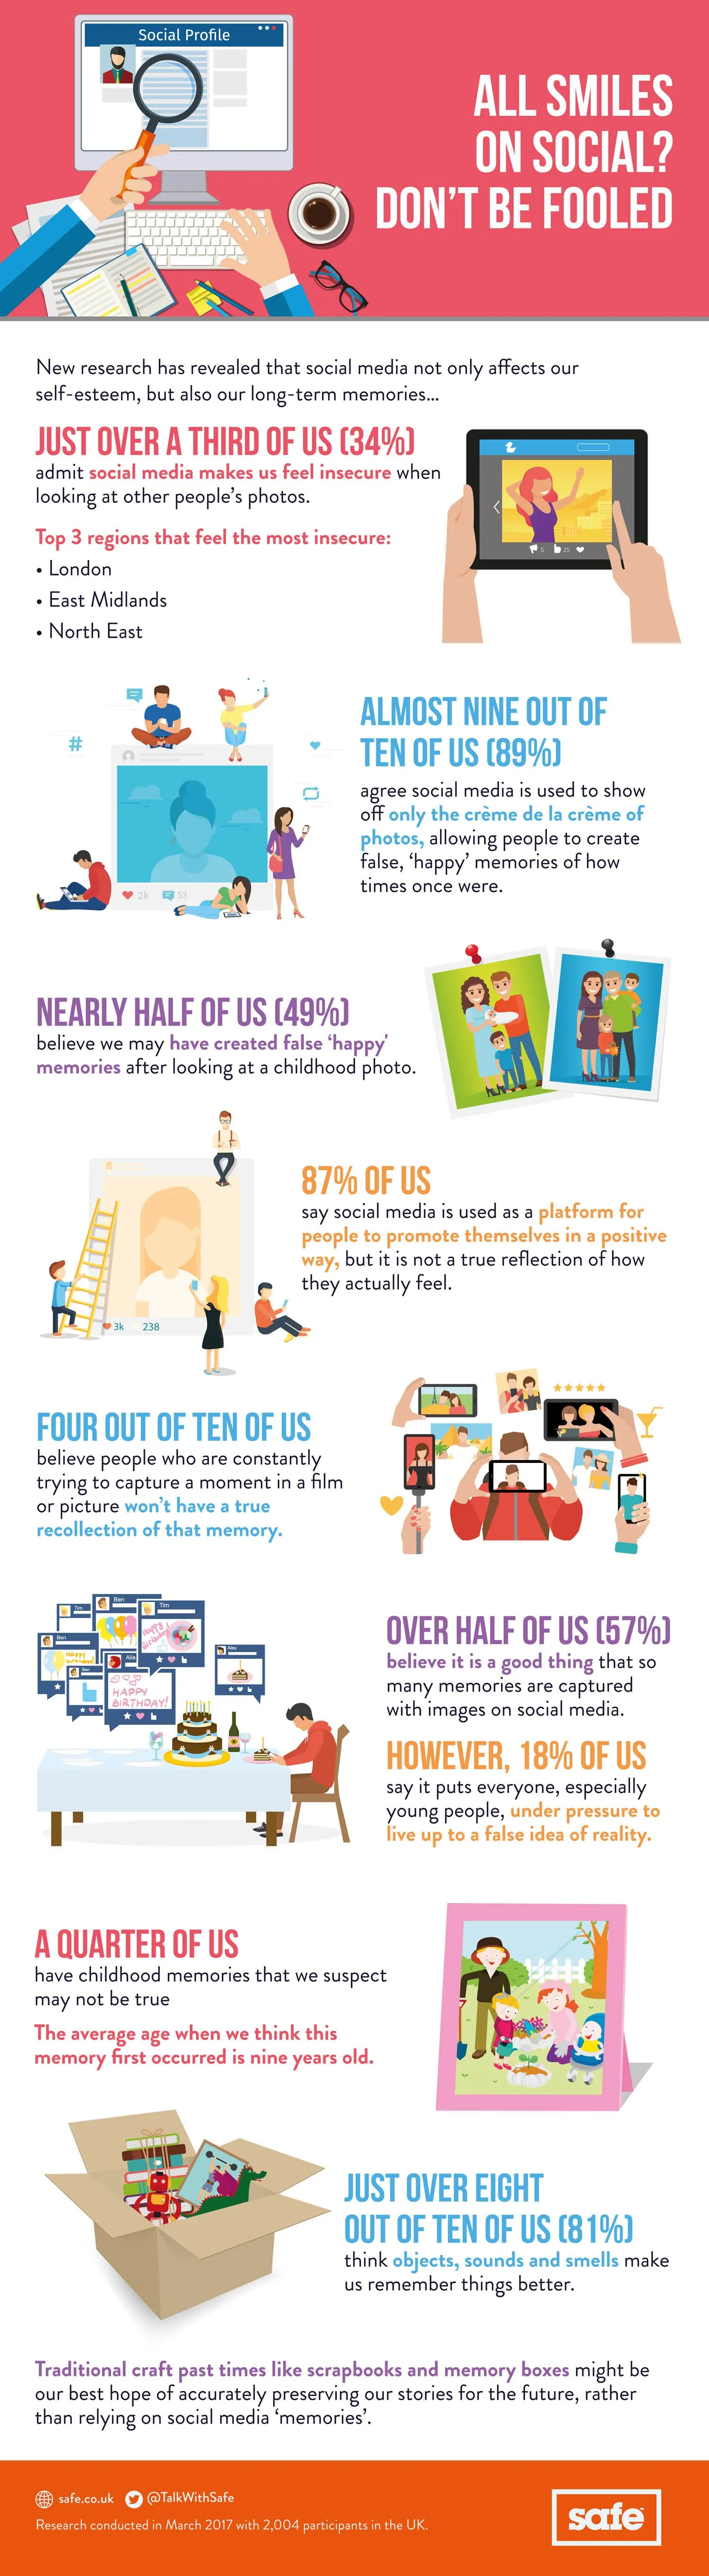 All Smiles on Social? Don’t Be Fooled - #infographic